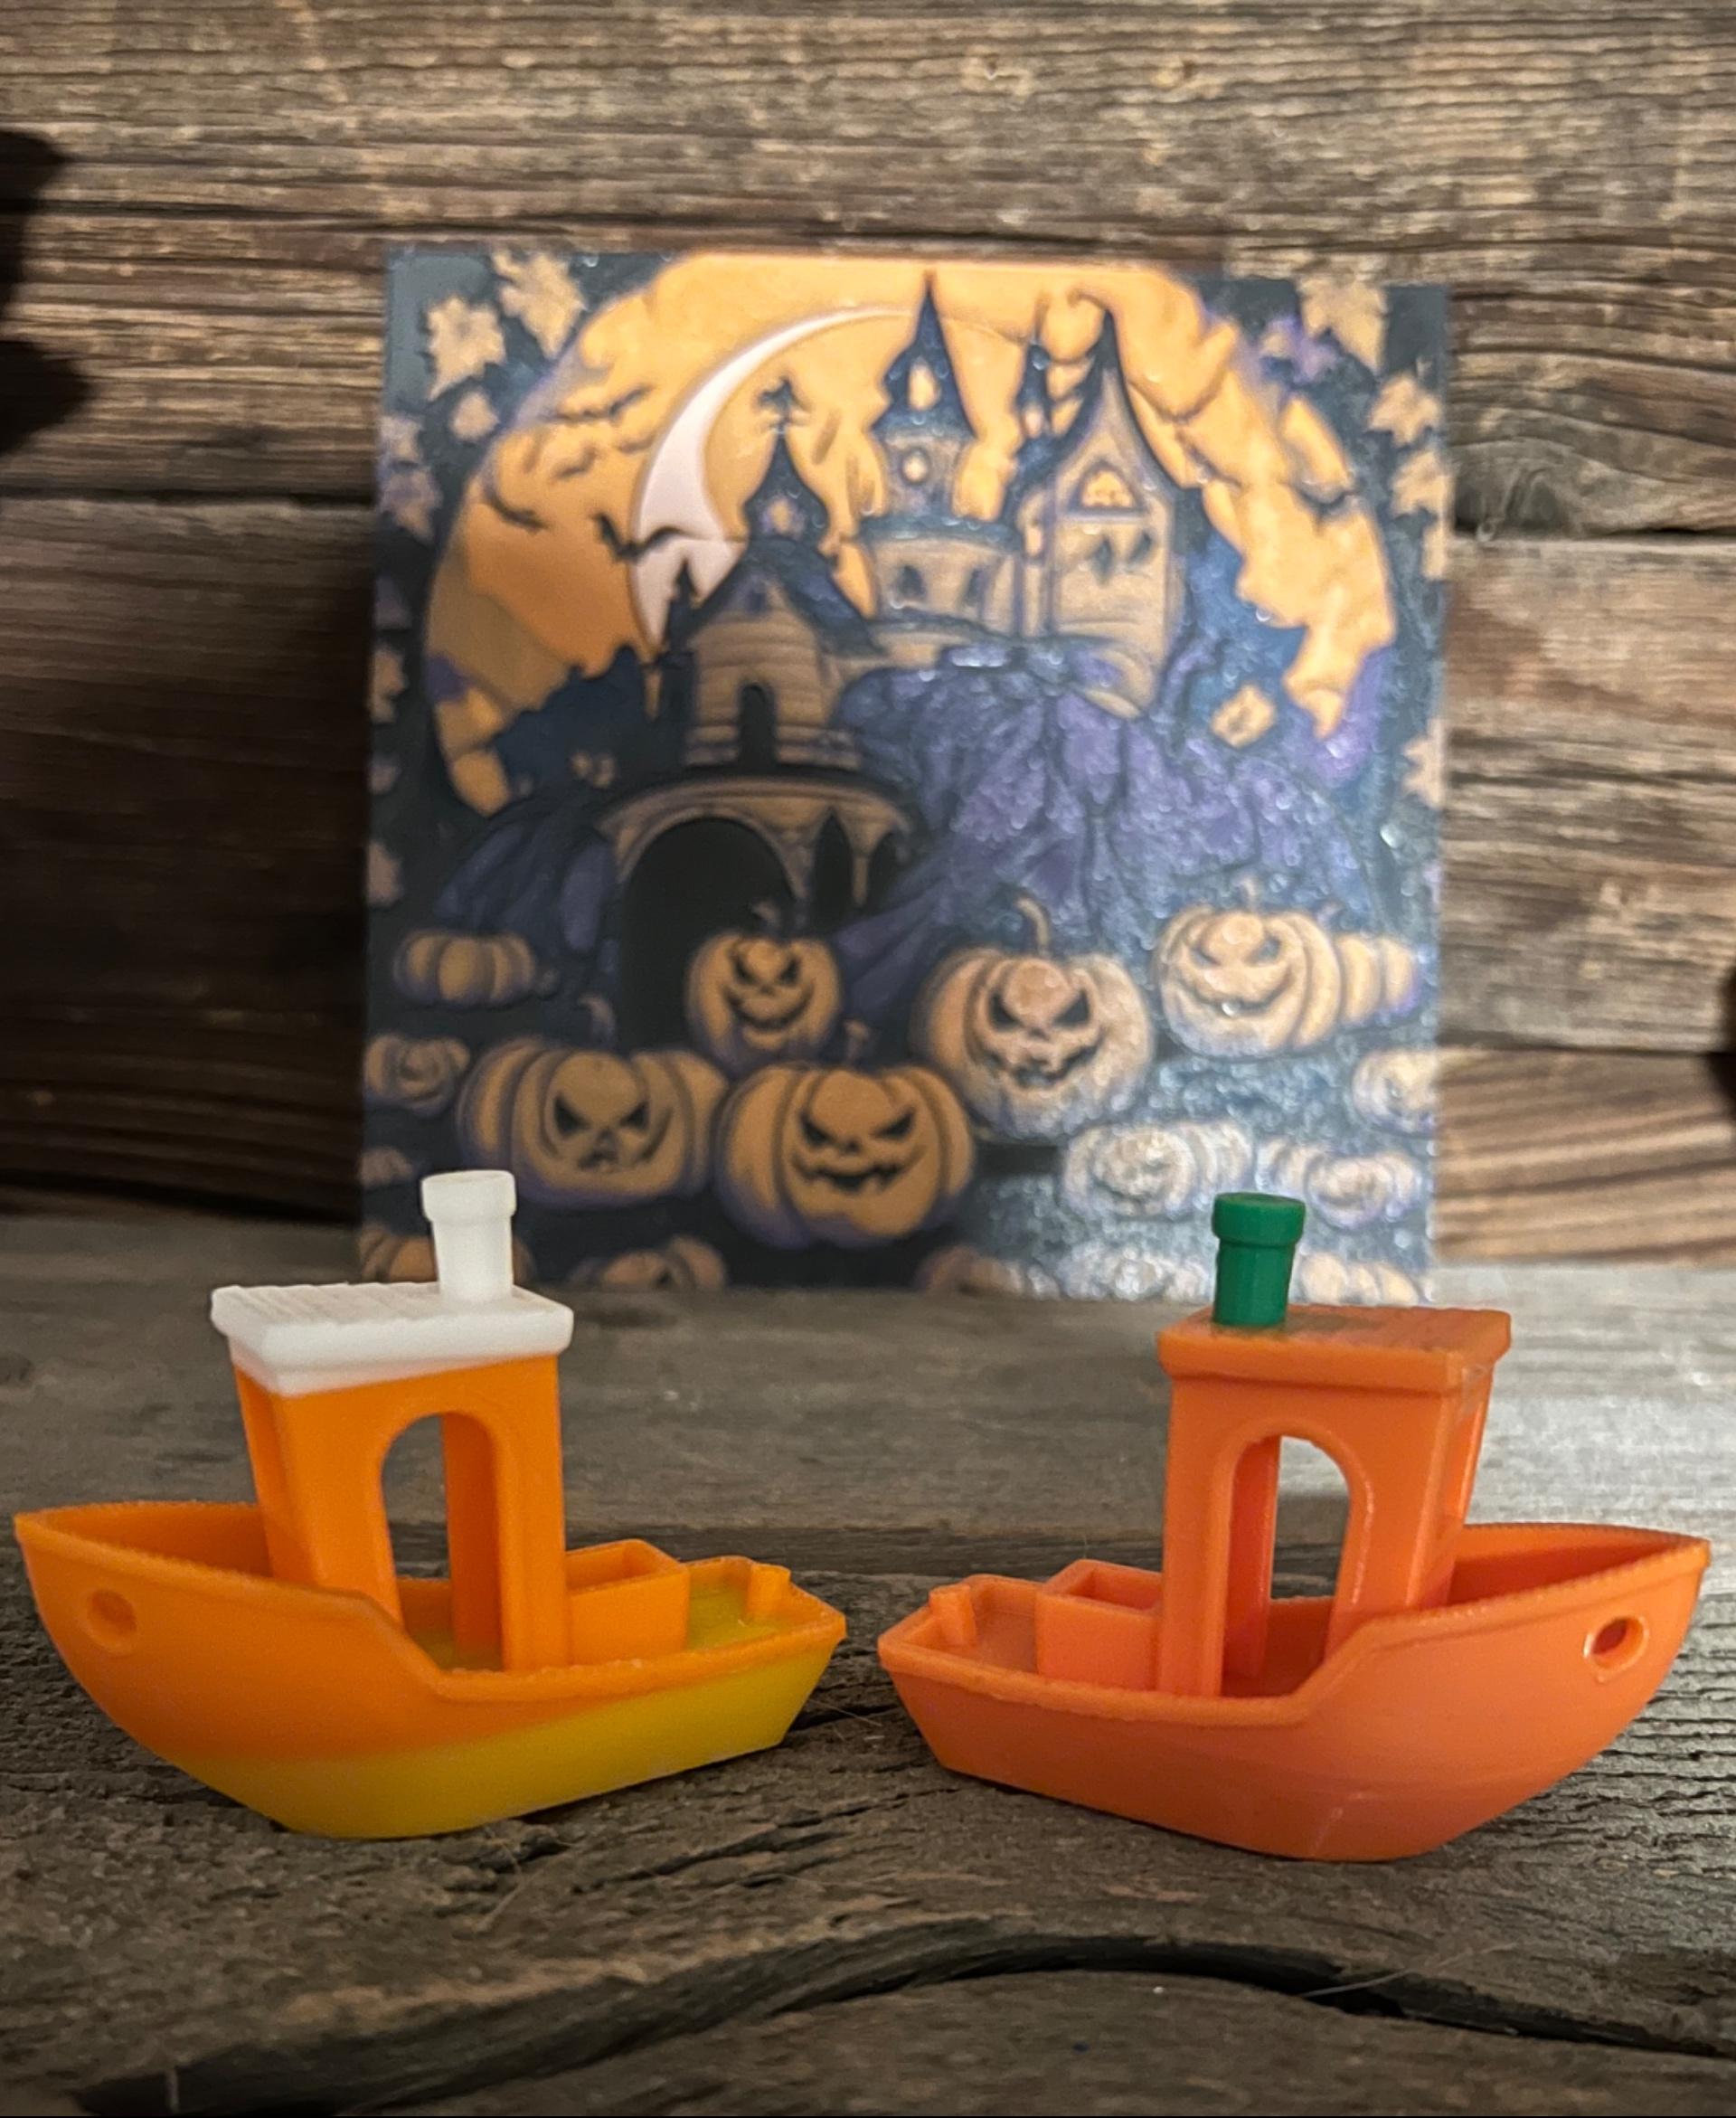 Original 3D Benchy - Polymaker Polylite Orange, Yellow and White - 3d model